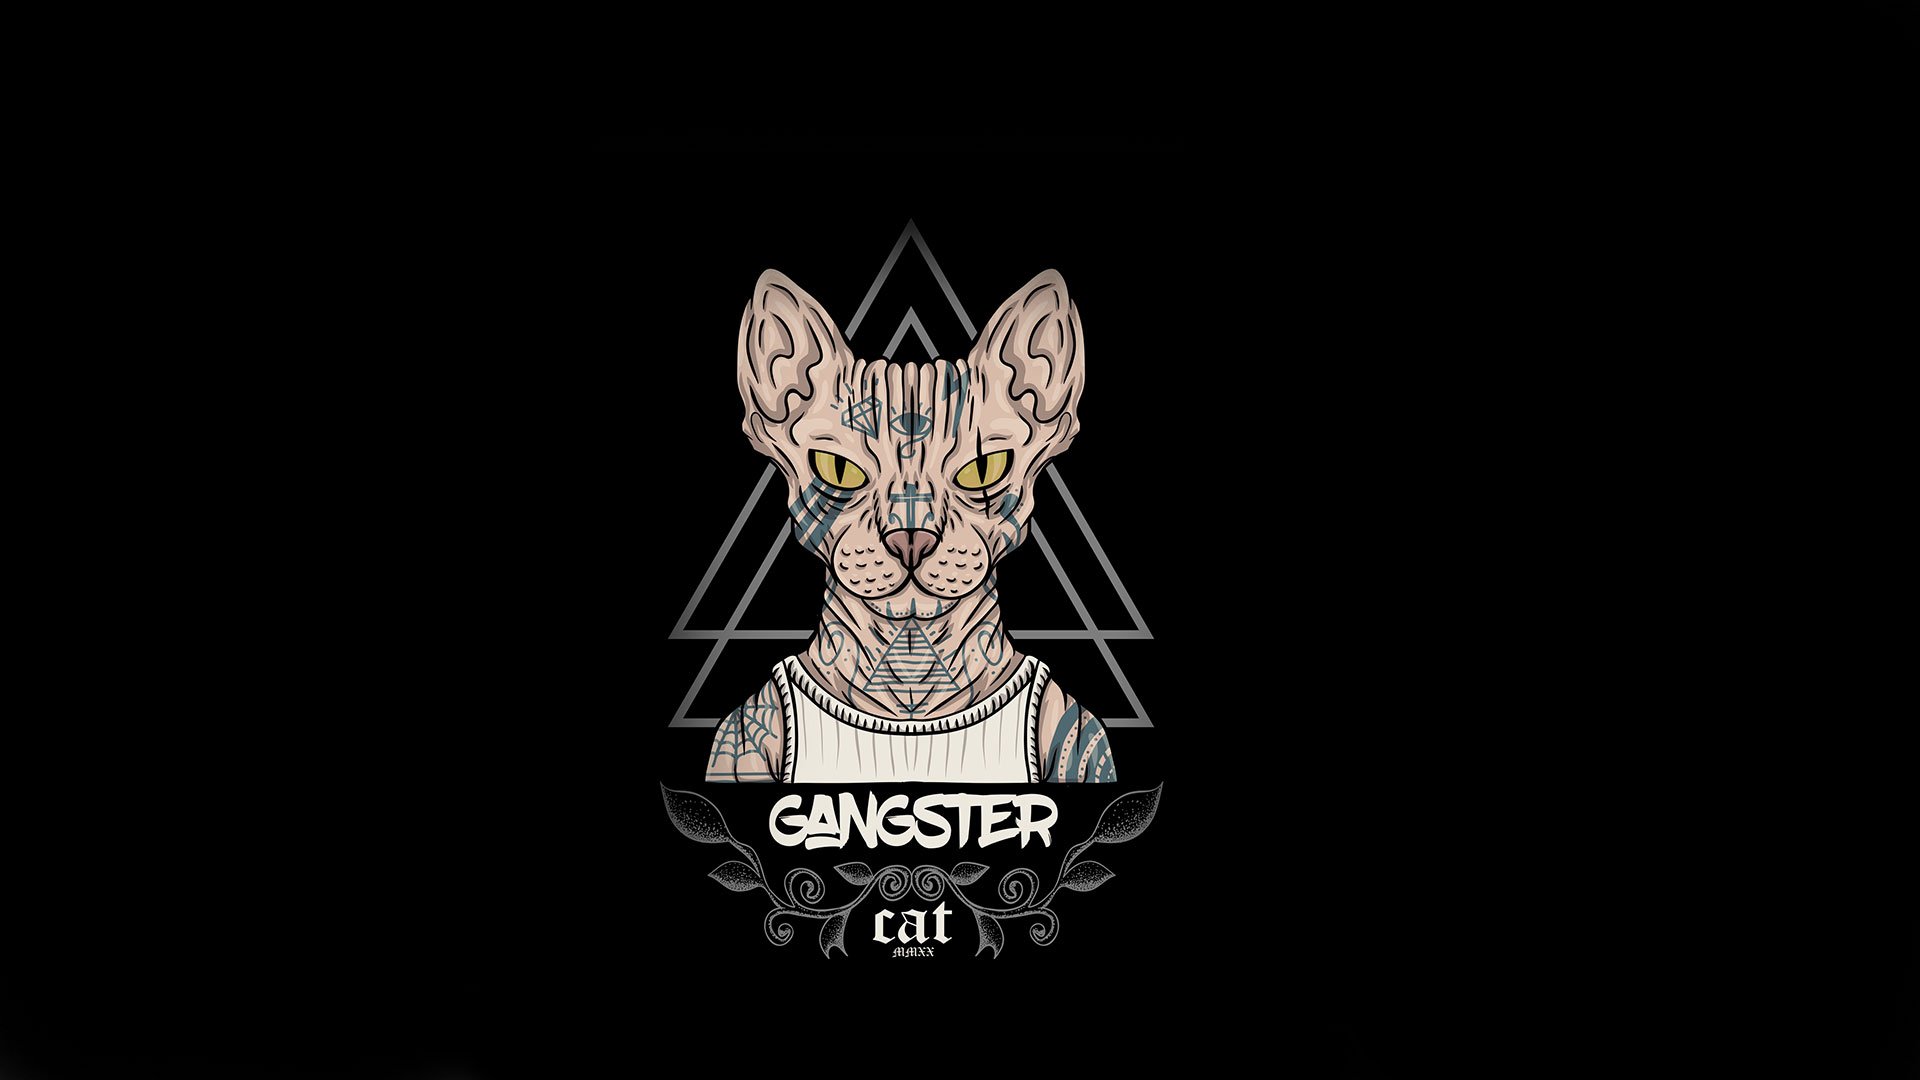 Sphynx cat with tattoos and the text gangster